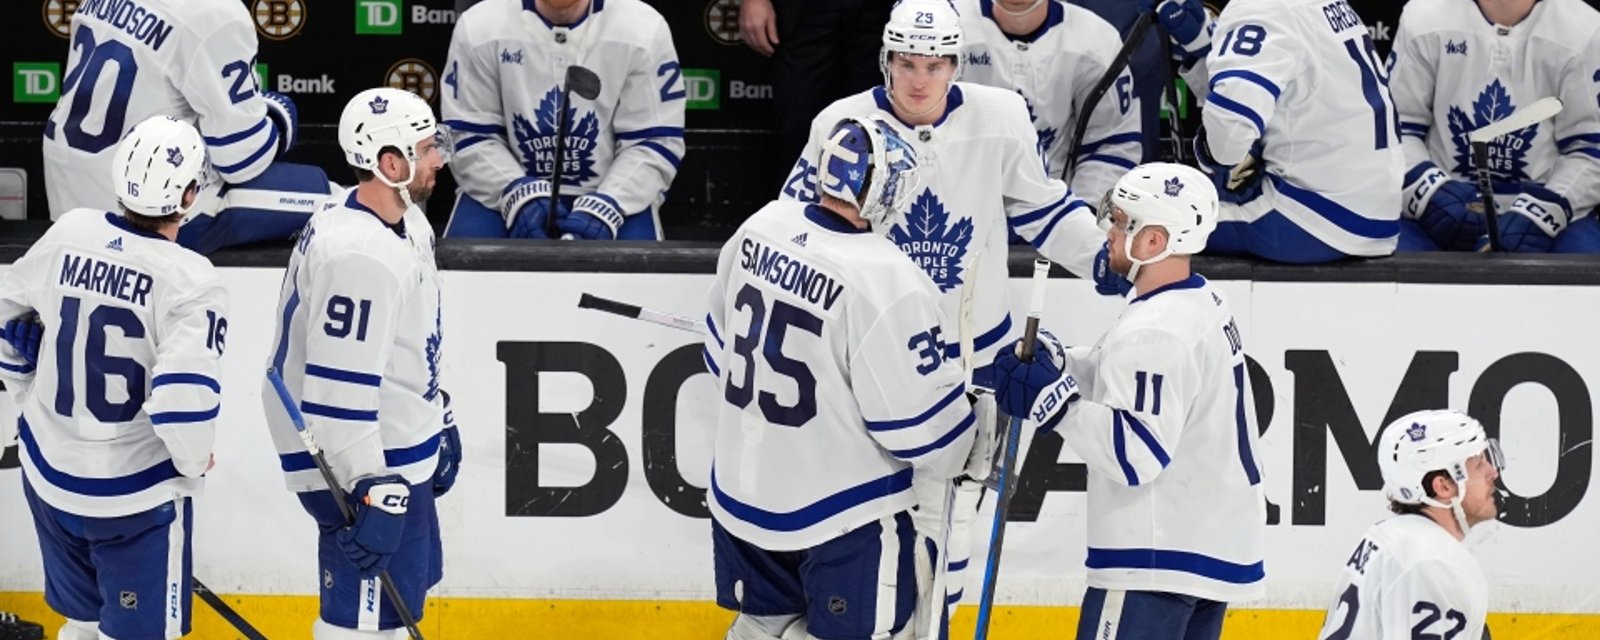 New plan unfolds for Maple Leafs to shake loser’s mentality